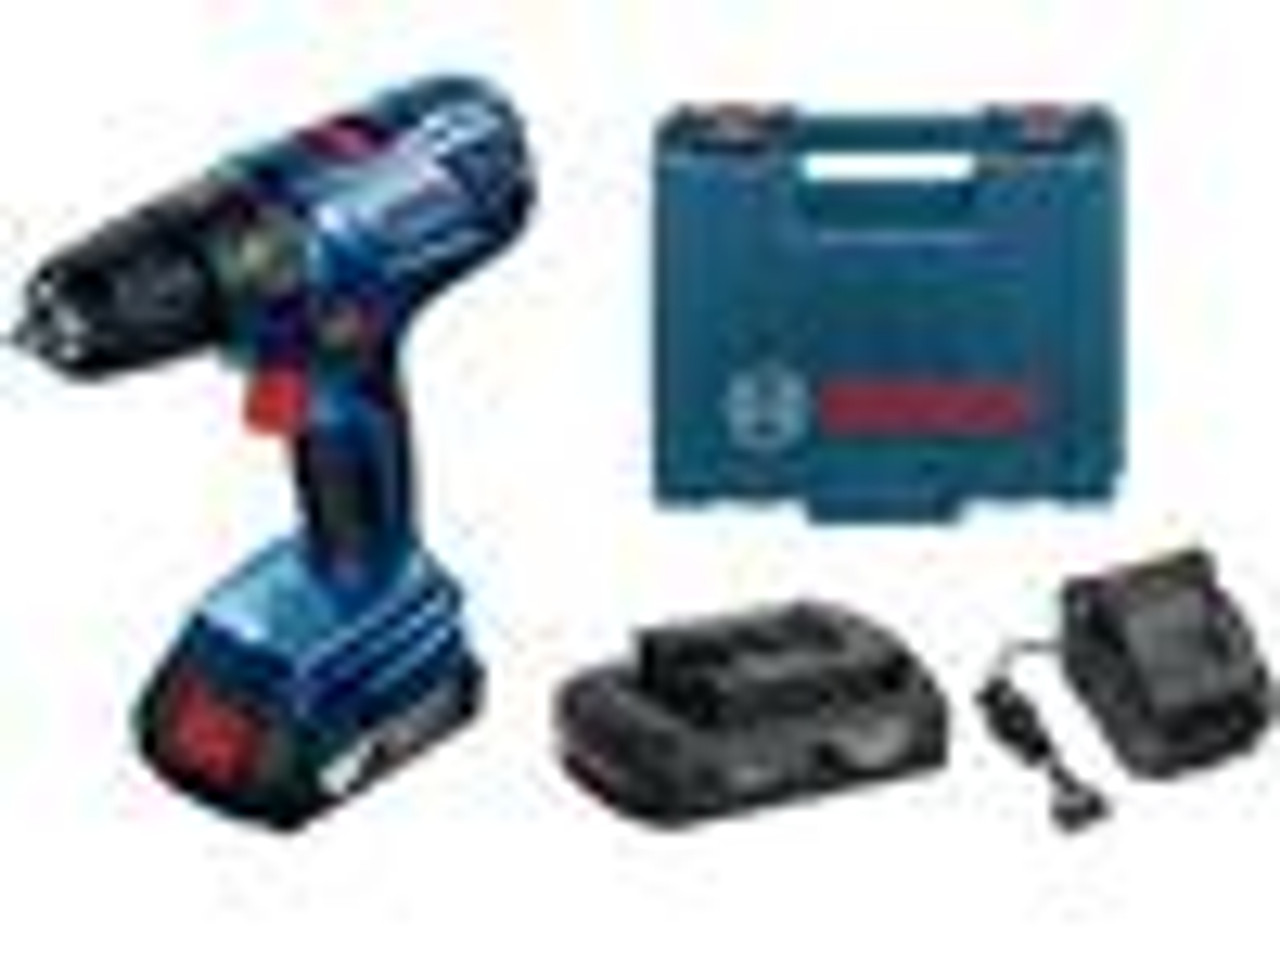 Bosch - Bosch Professional Power Tools and Accessories